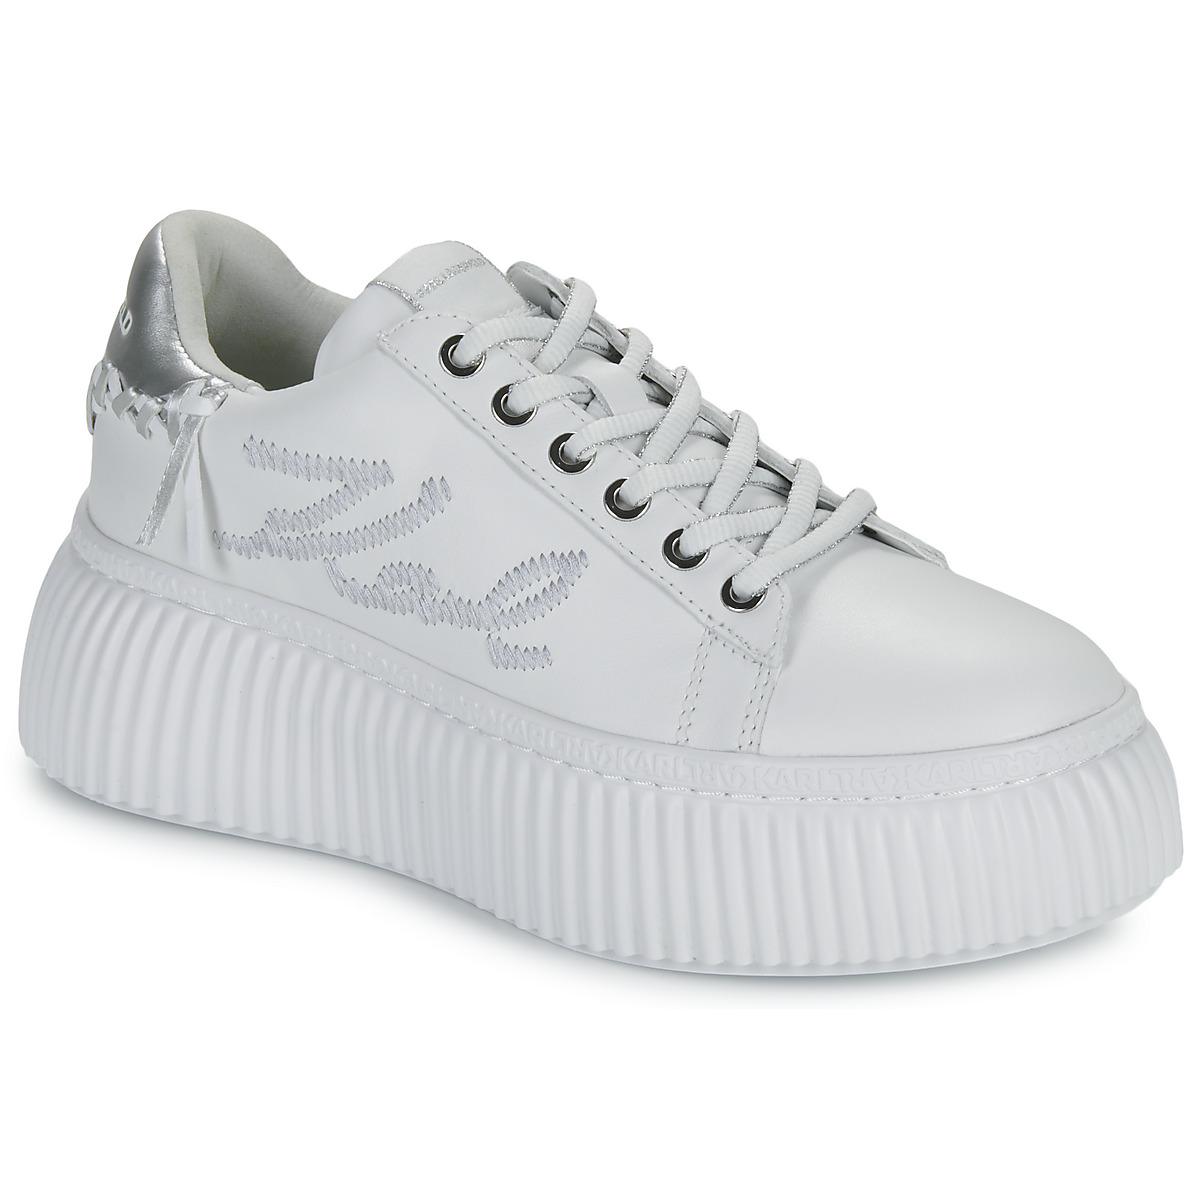 Karl Lagerfeld  Xαμηλά Sneakers Karl Lagerfeld KREEPER LO Whipstitch Lo Lace